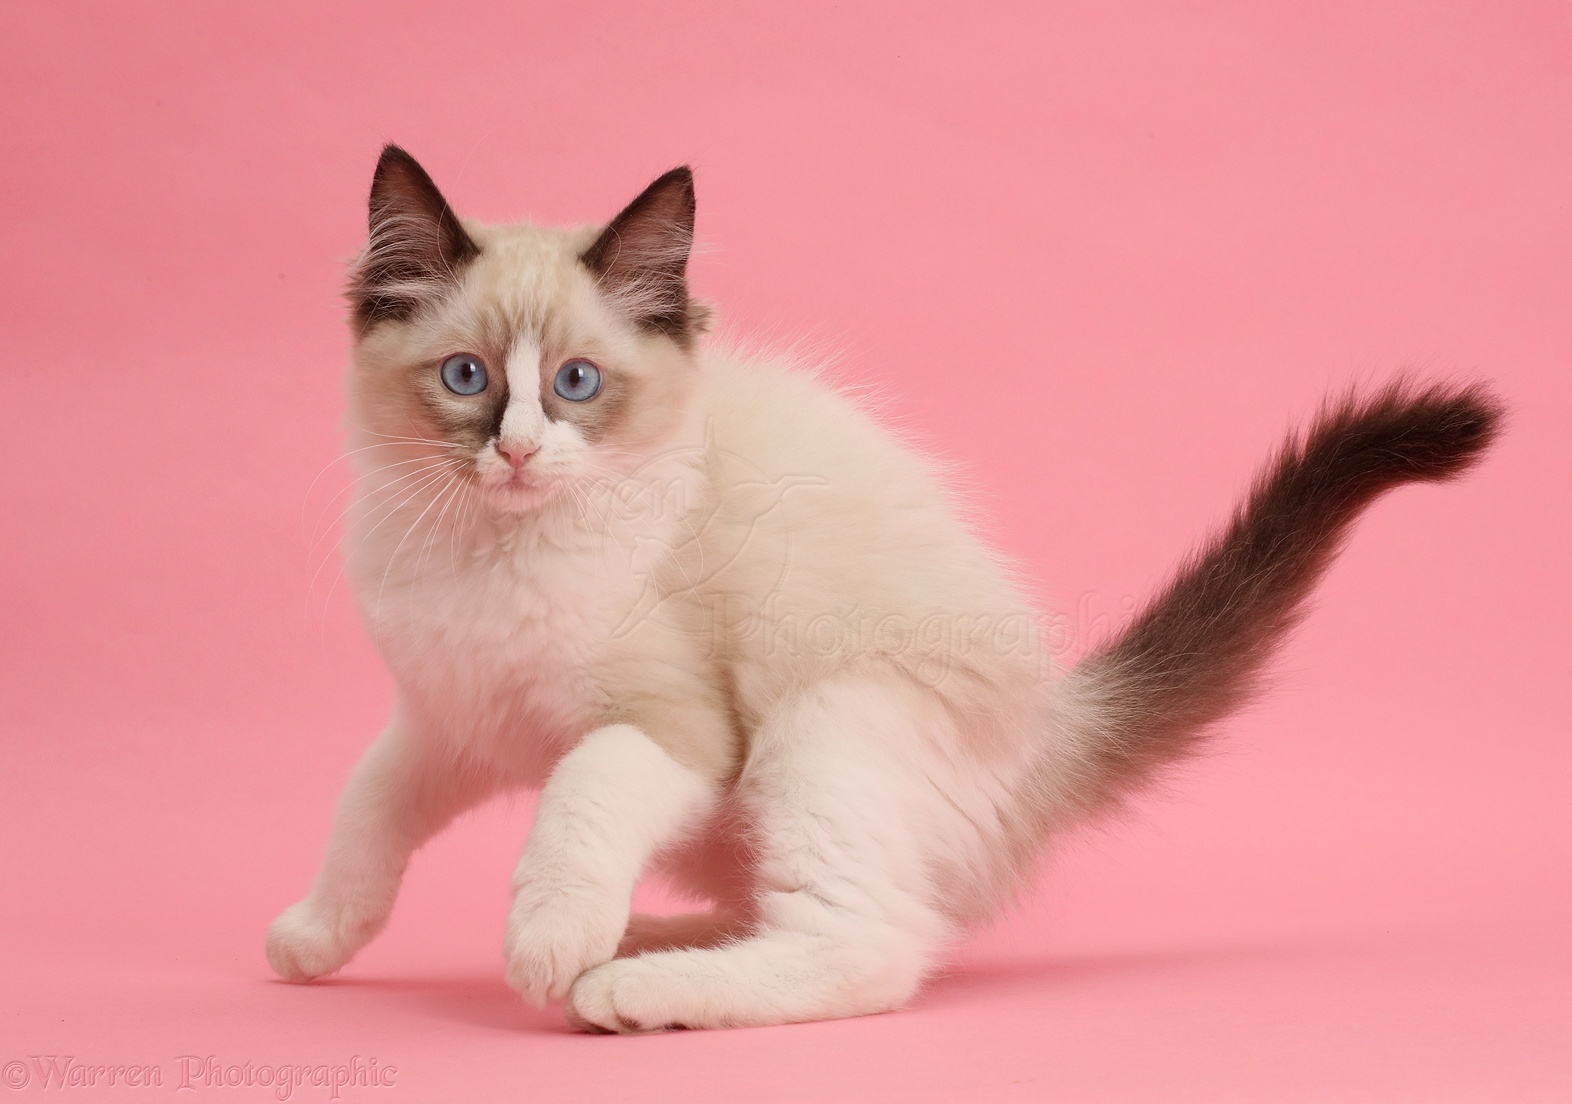 Free download Ragdoll kitten 10 weeks old on pink background photo WP44732 [1572x1104] for your